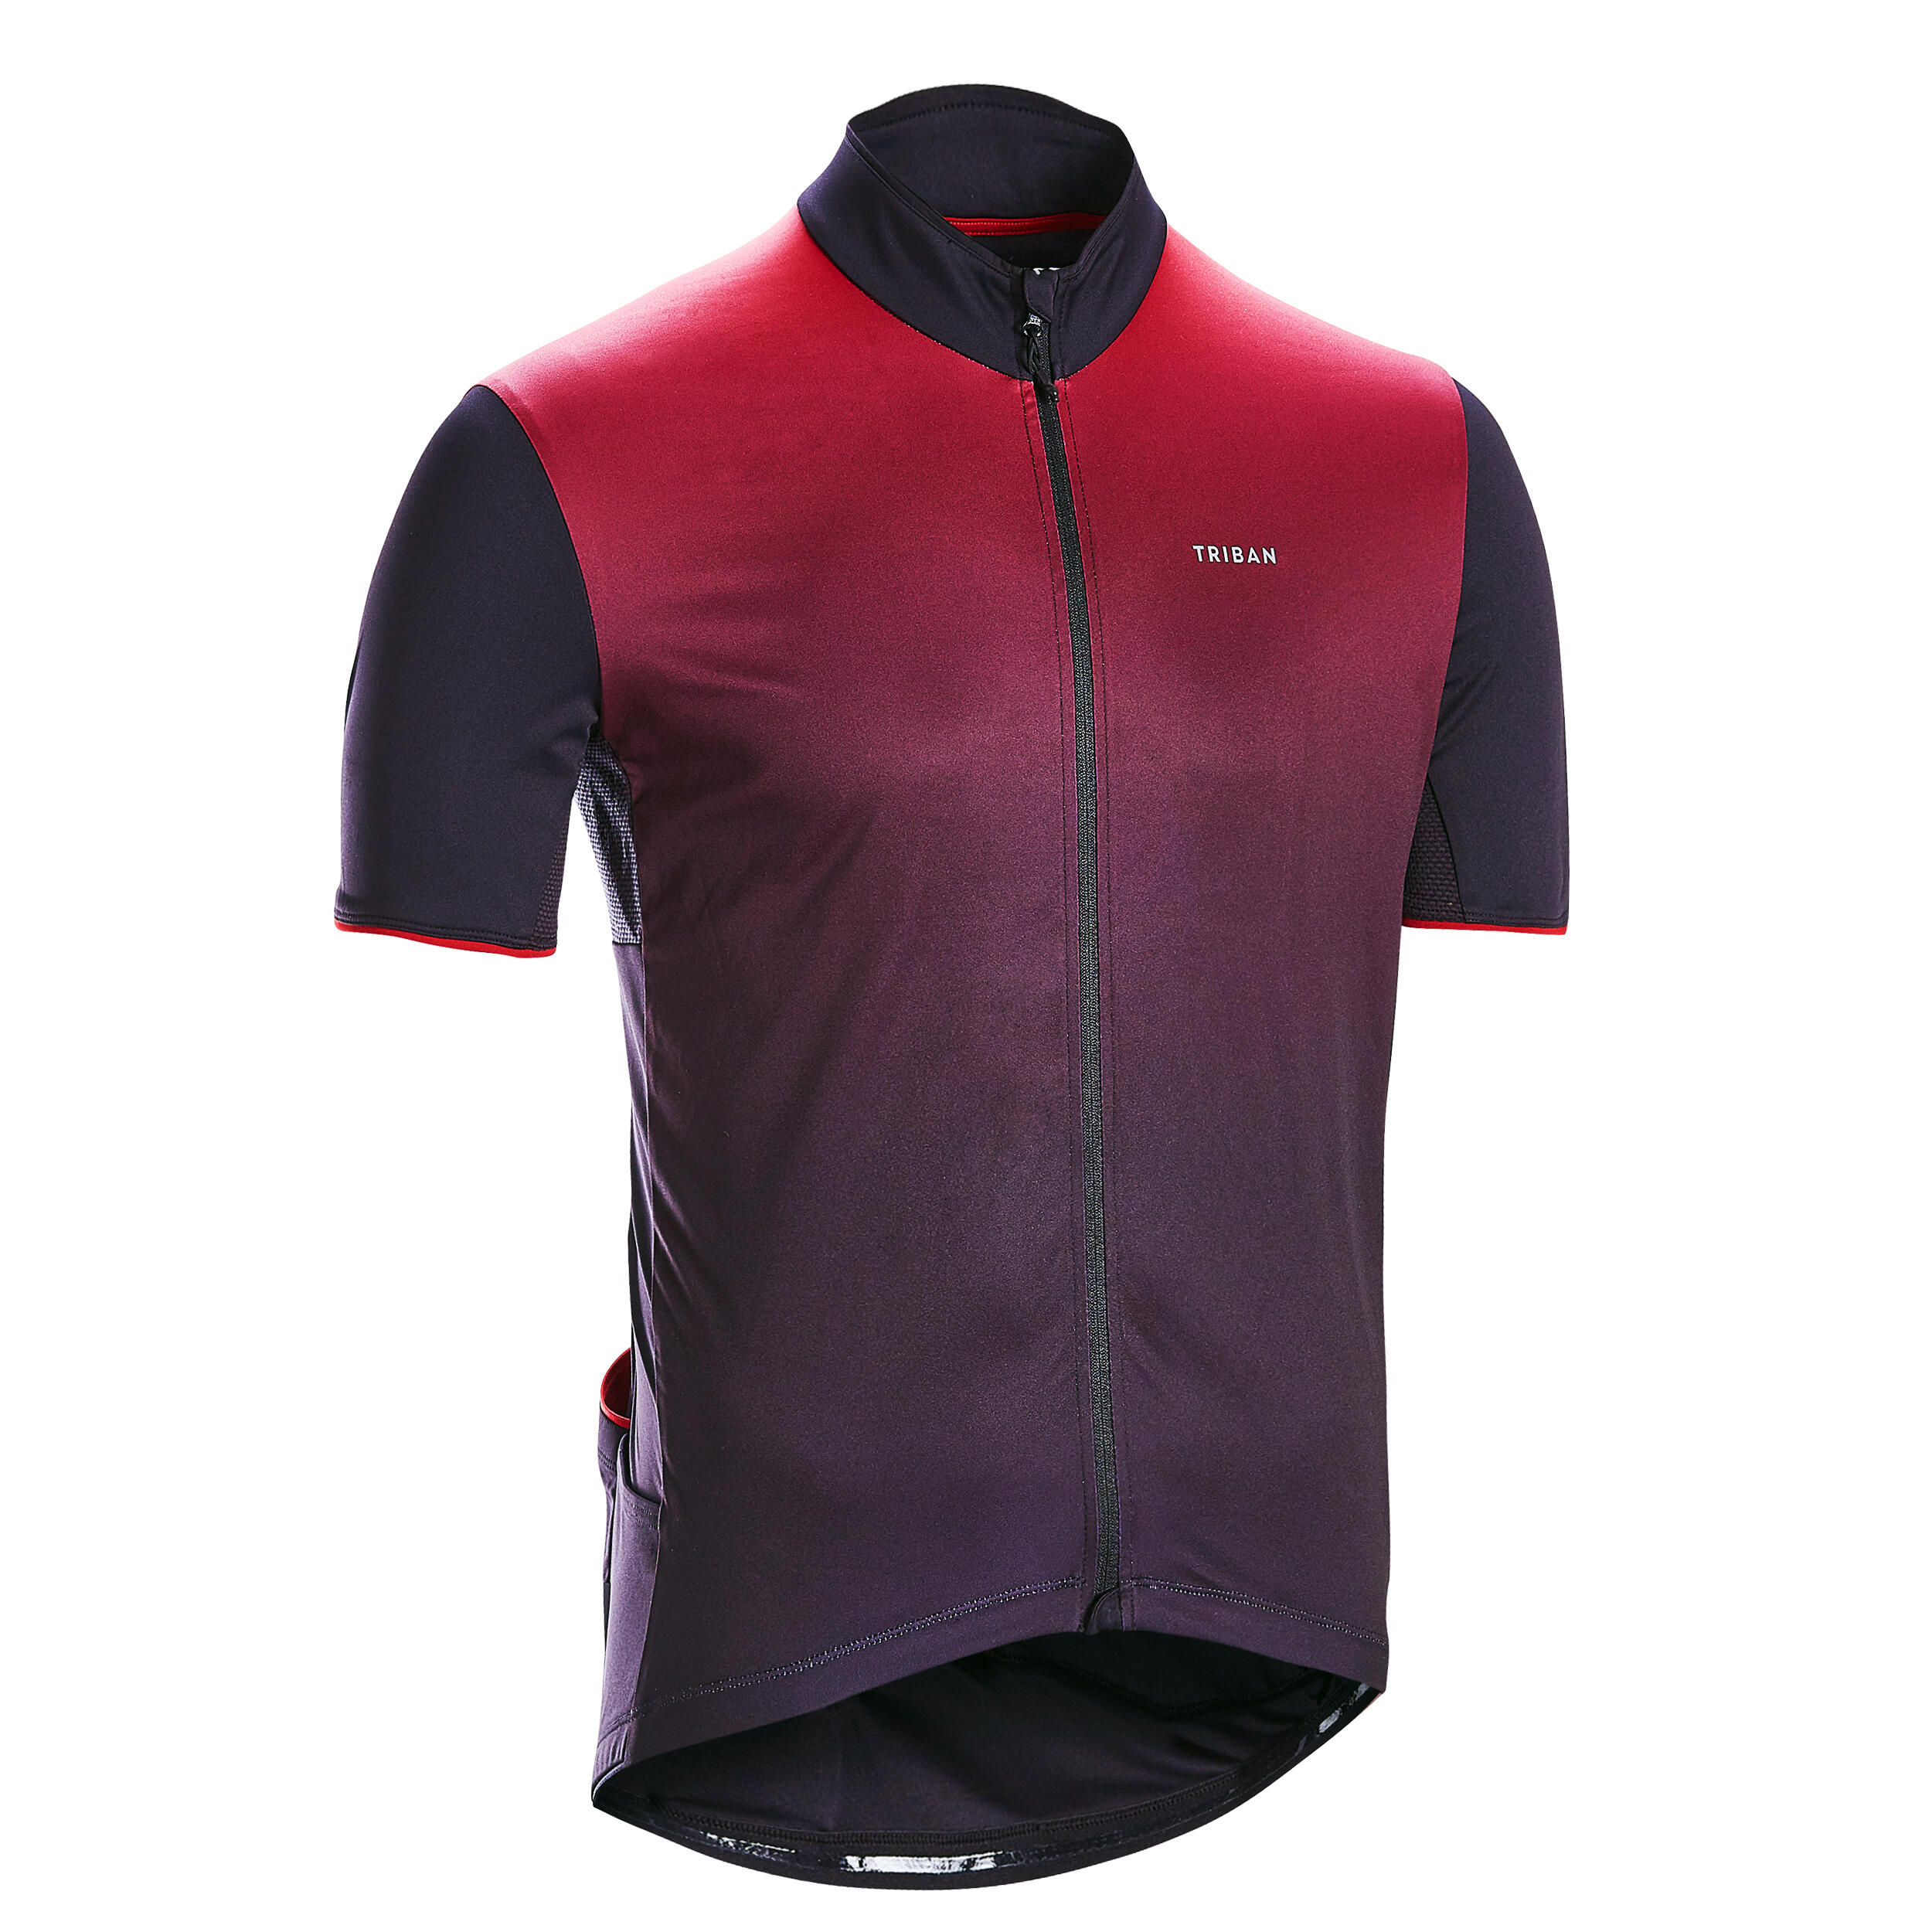 RC500 Short-Sleeved Road Cycling Jersey - Black/Burgundy 8/10